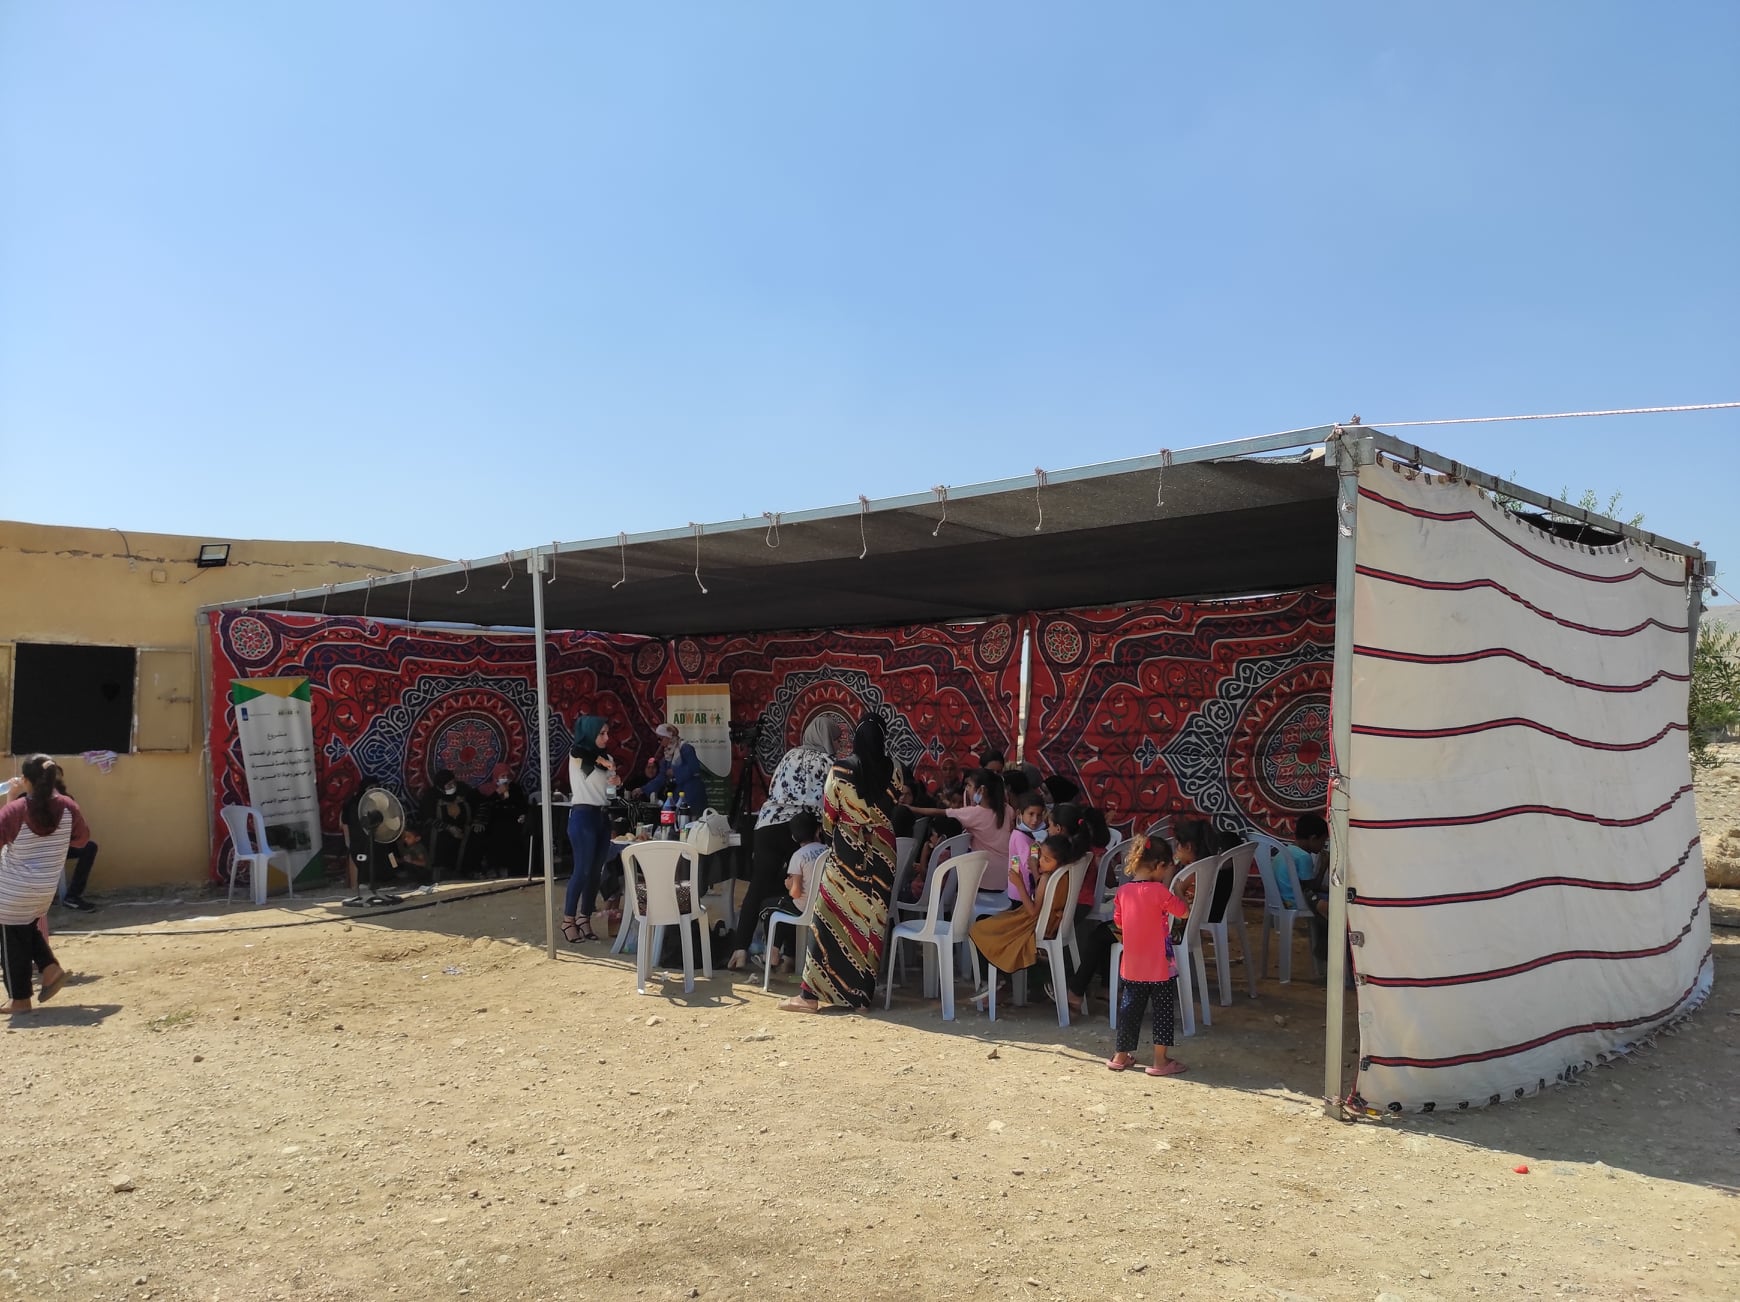  Women Protection Committee in Al-Fasayel Bedouin community implements “Pavilion Initiative for Weddings and Events”